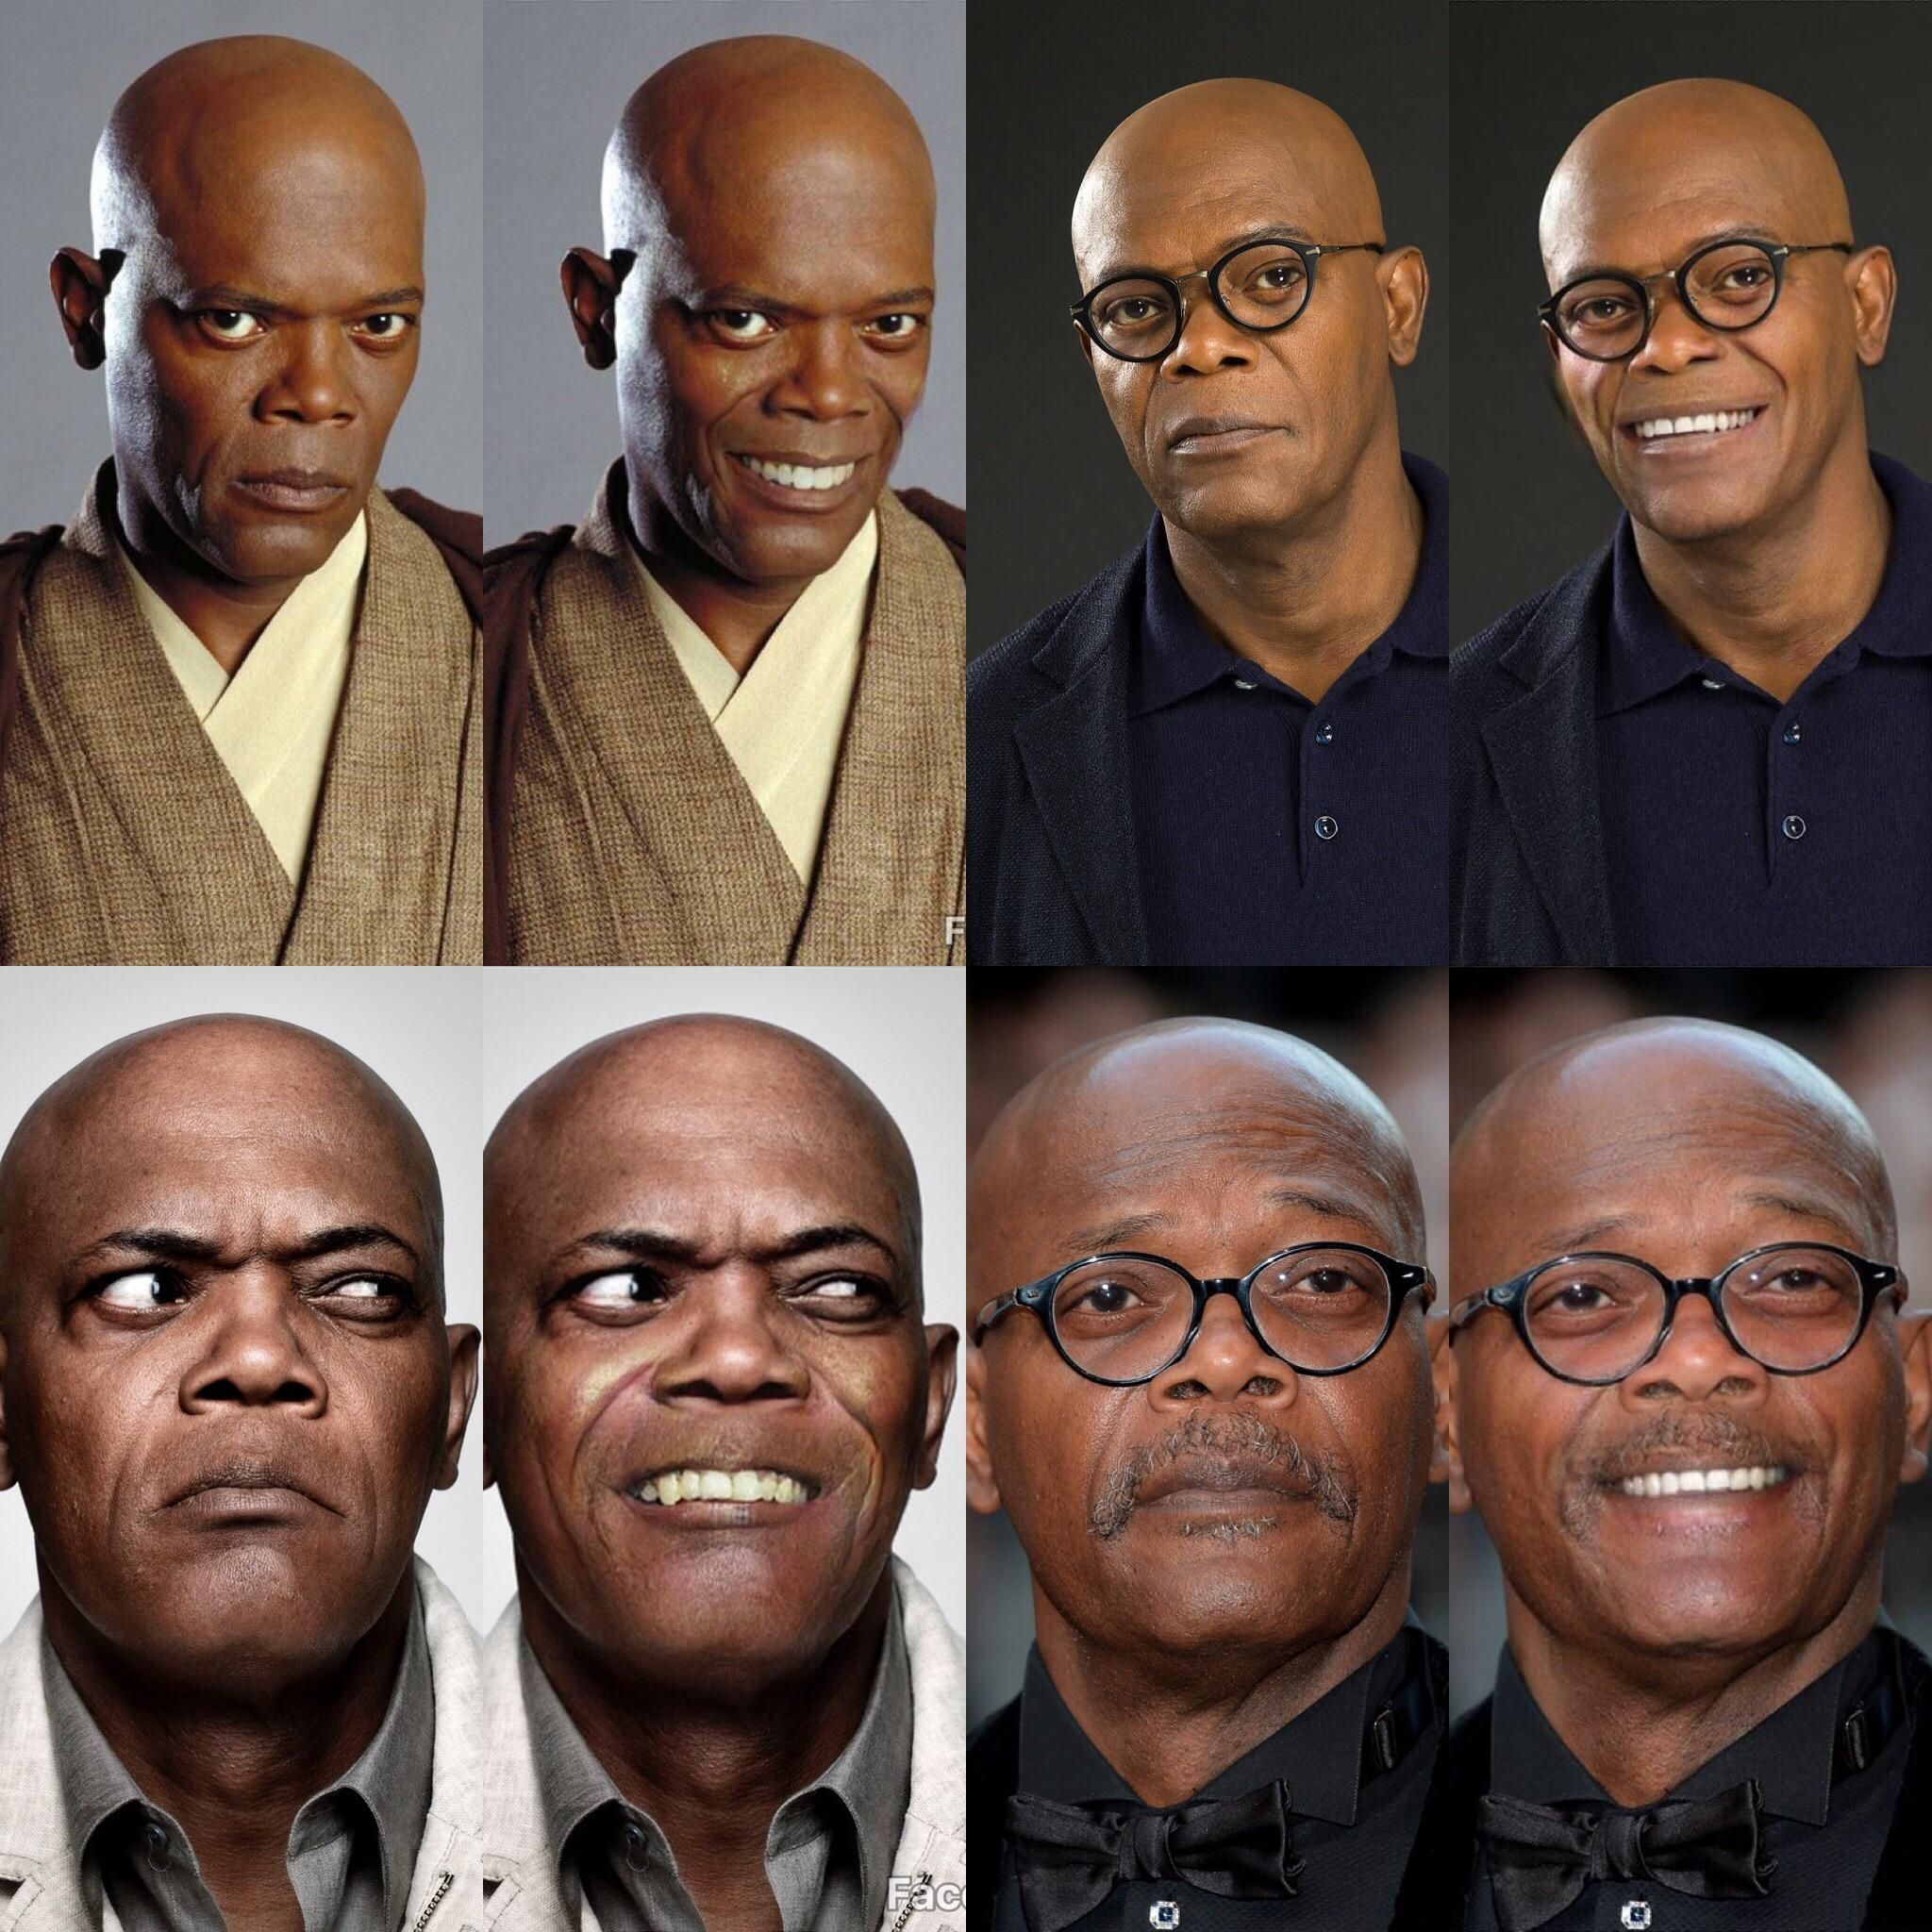 My new favorite thing is adding smiles to pictures of Samuel L. Jackson.